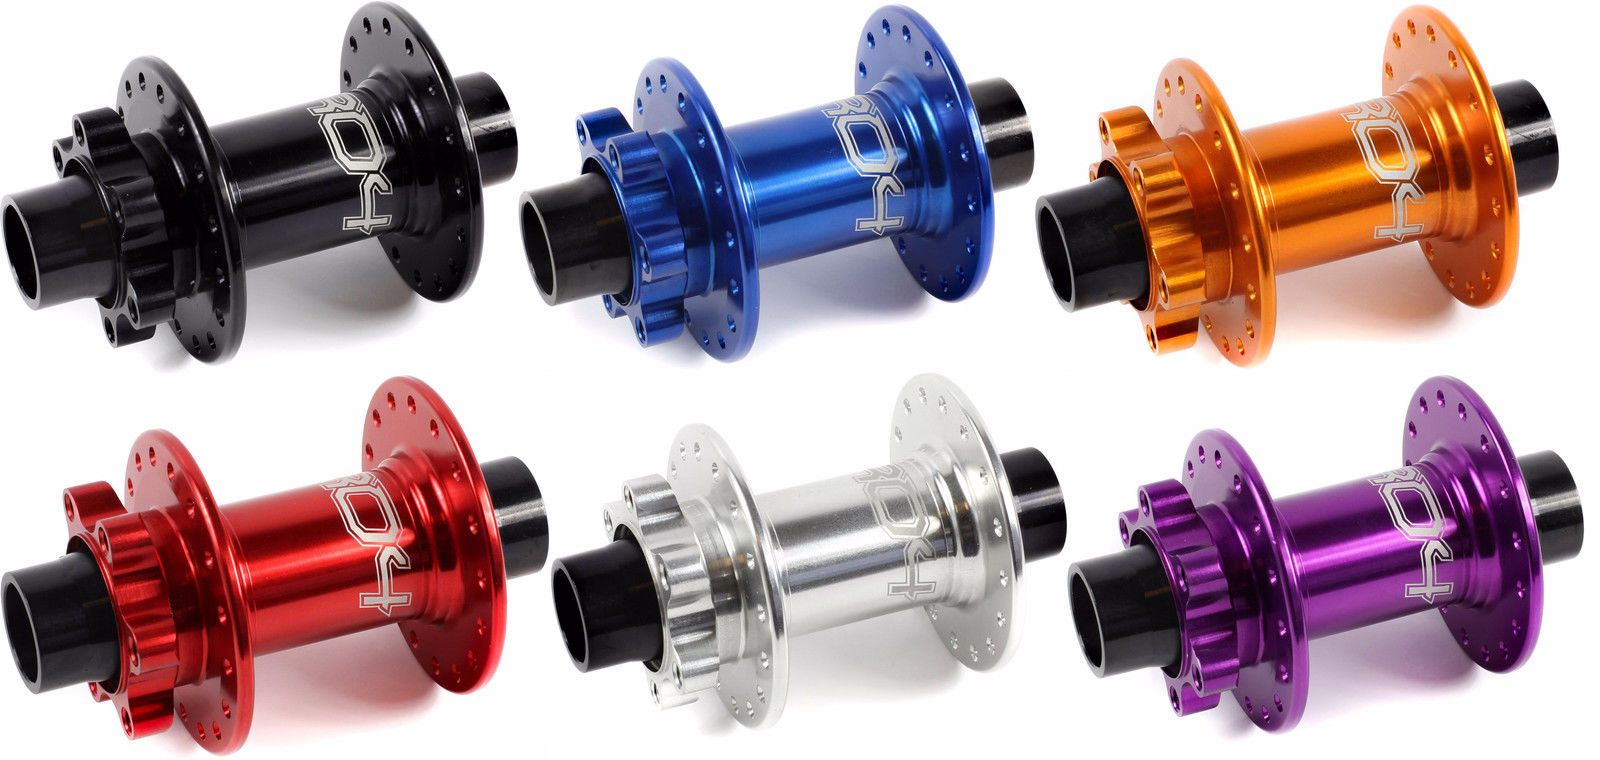 hope-pro-4-cycle-bike-front-hub-28-hole-all-colours-and-sizes-axle-size-20mm-colour-orange-9725-p.jpeg